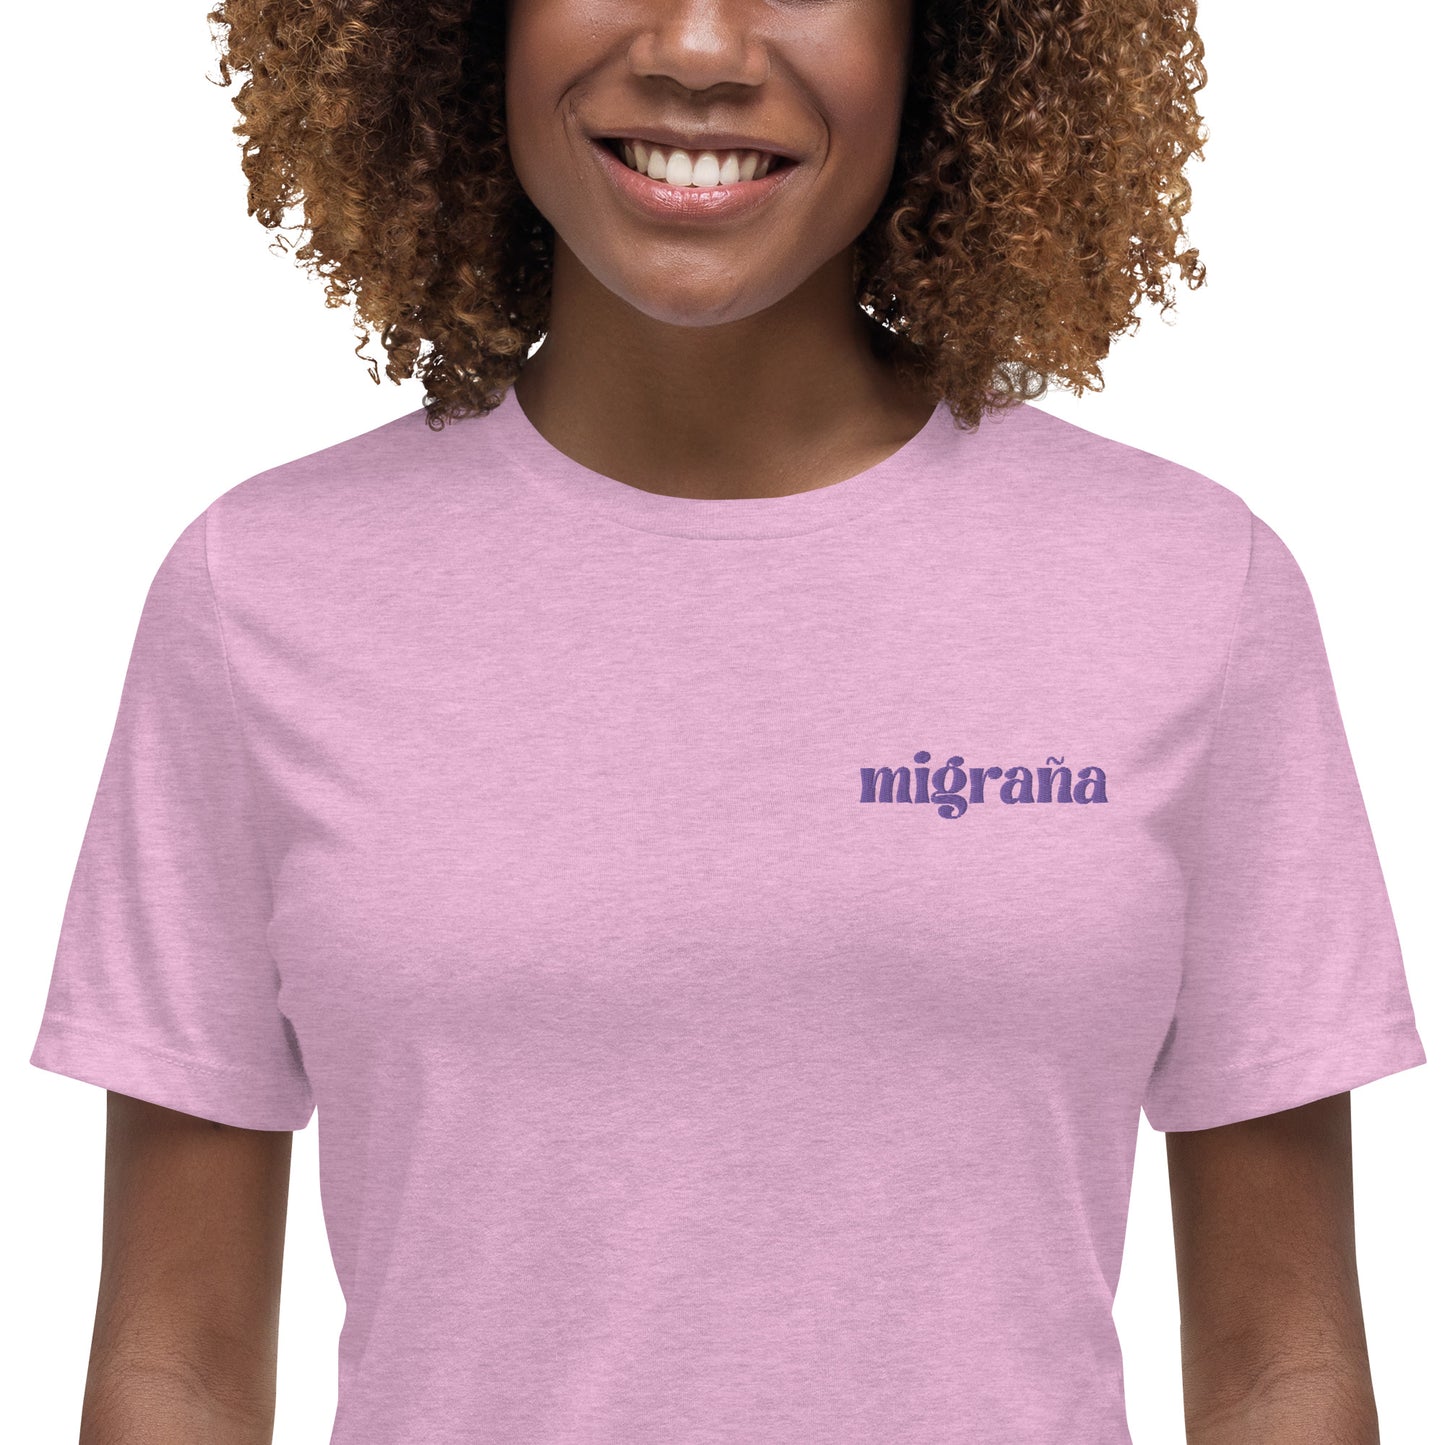 Migraña Embroidered Women's T-Shirt